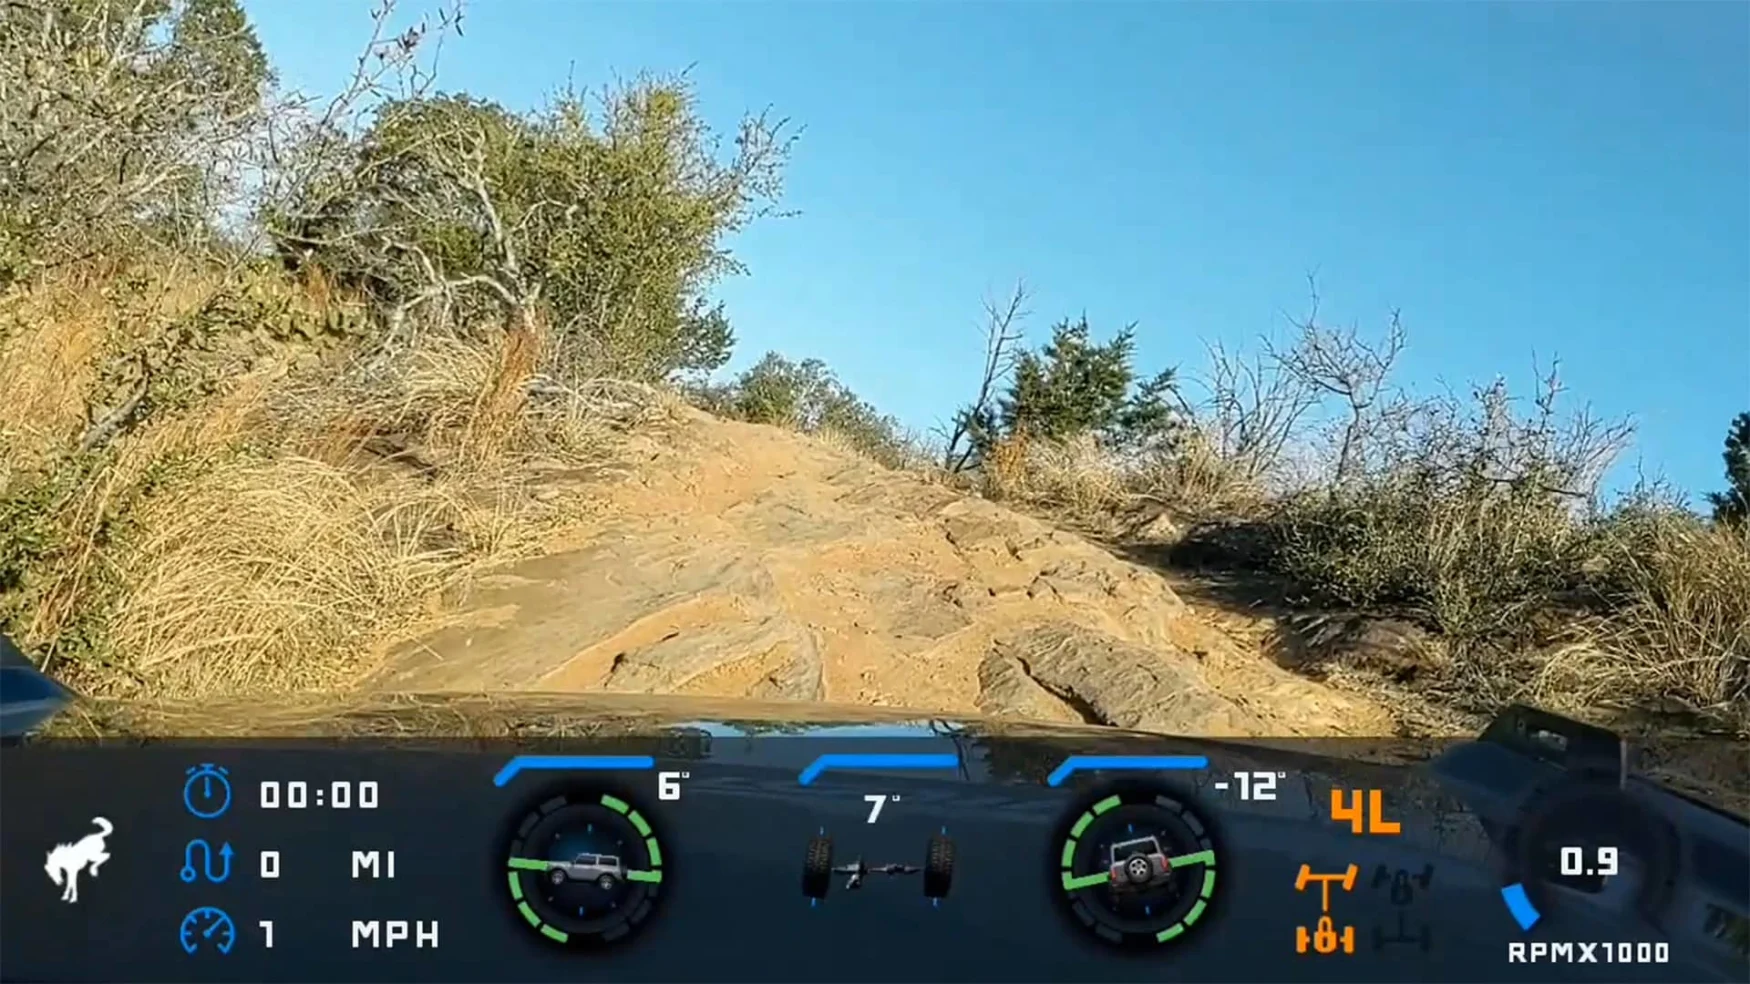 In-app video footage using the Ford Bronco Trail app, complete with data overlays. 